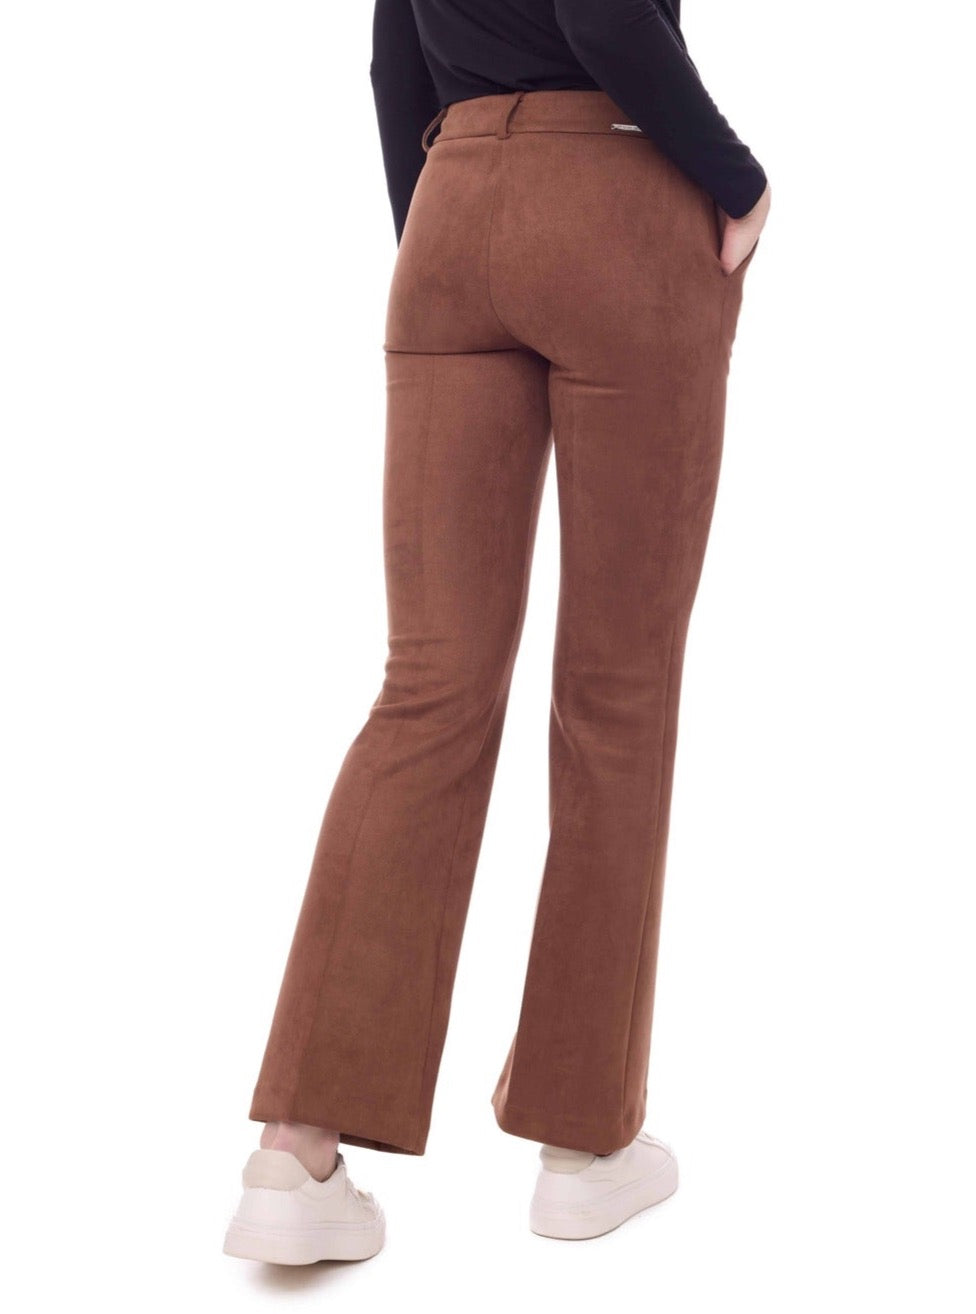 I Love Tyler Madison Paityn Stretch Suede Boot Cut Pant in Tobacco